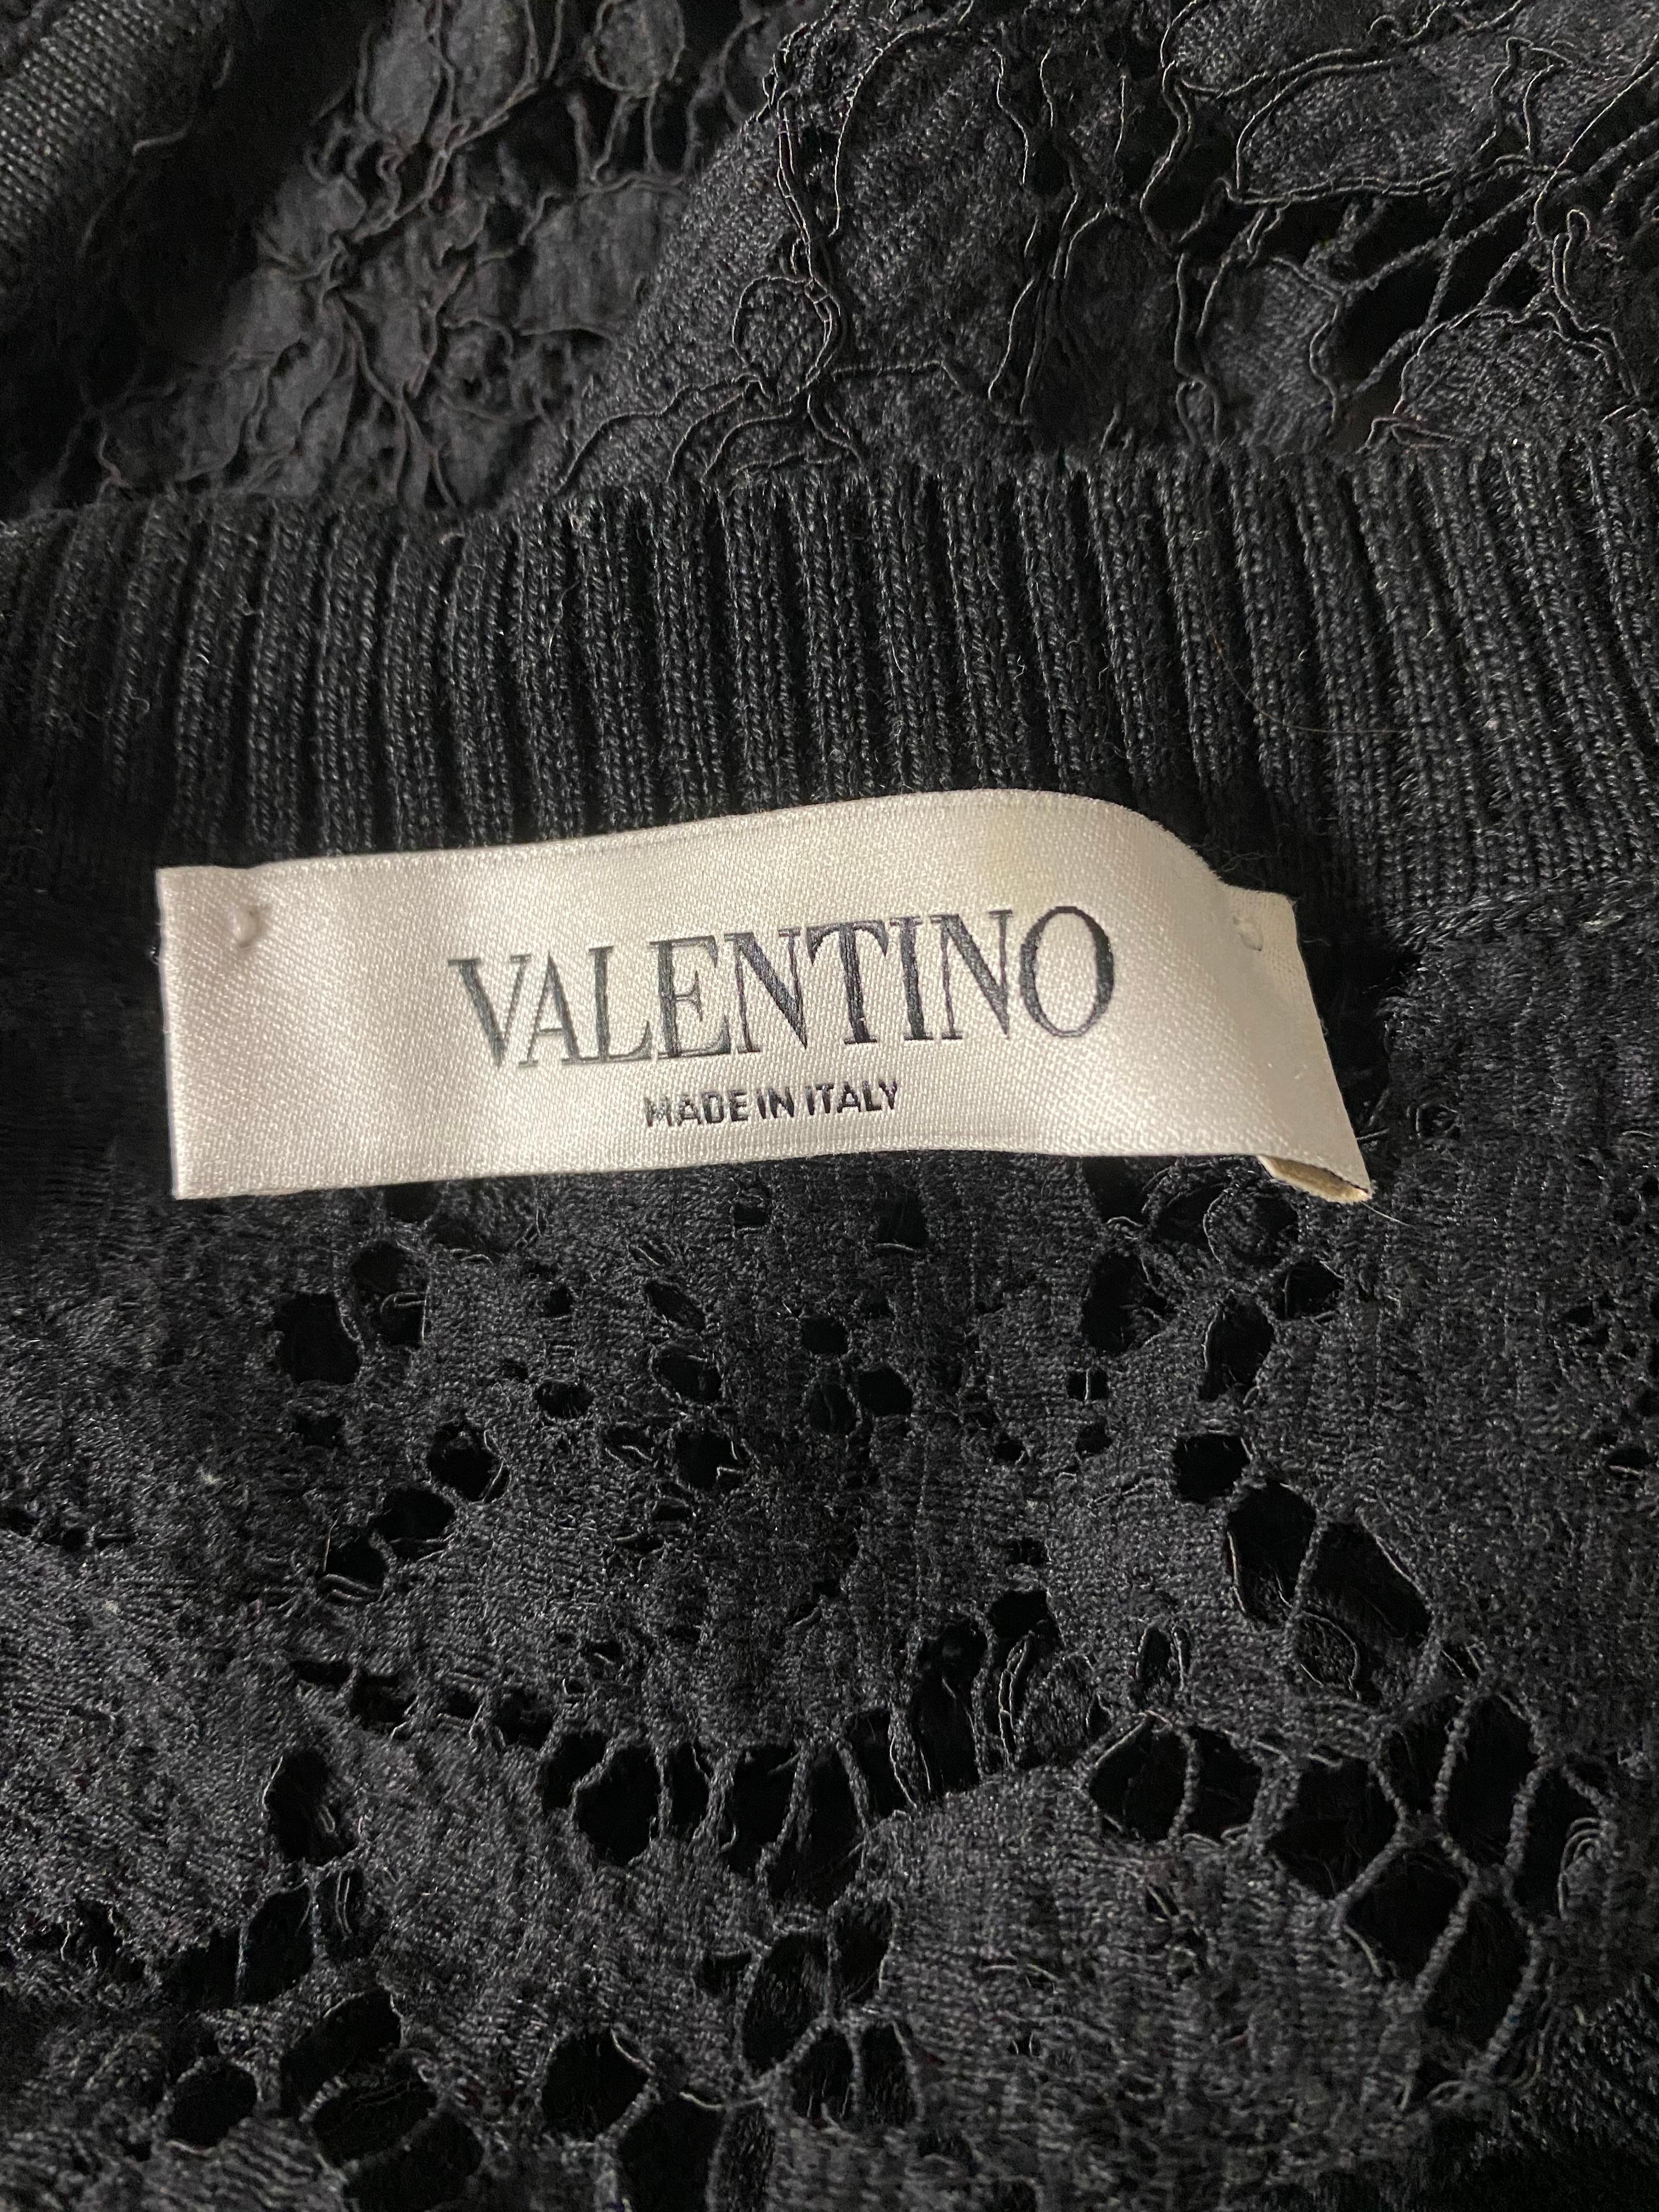 Valentino Black Lace Cardigan Top  For Sale 1